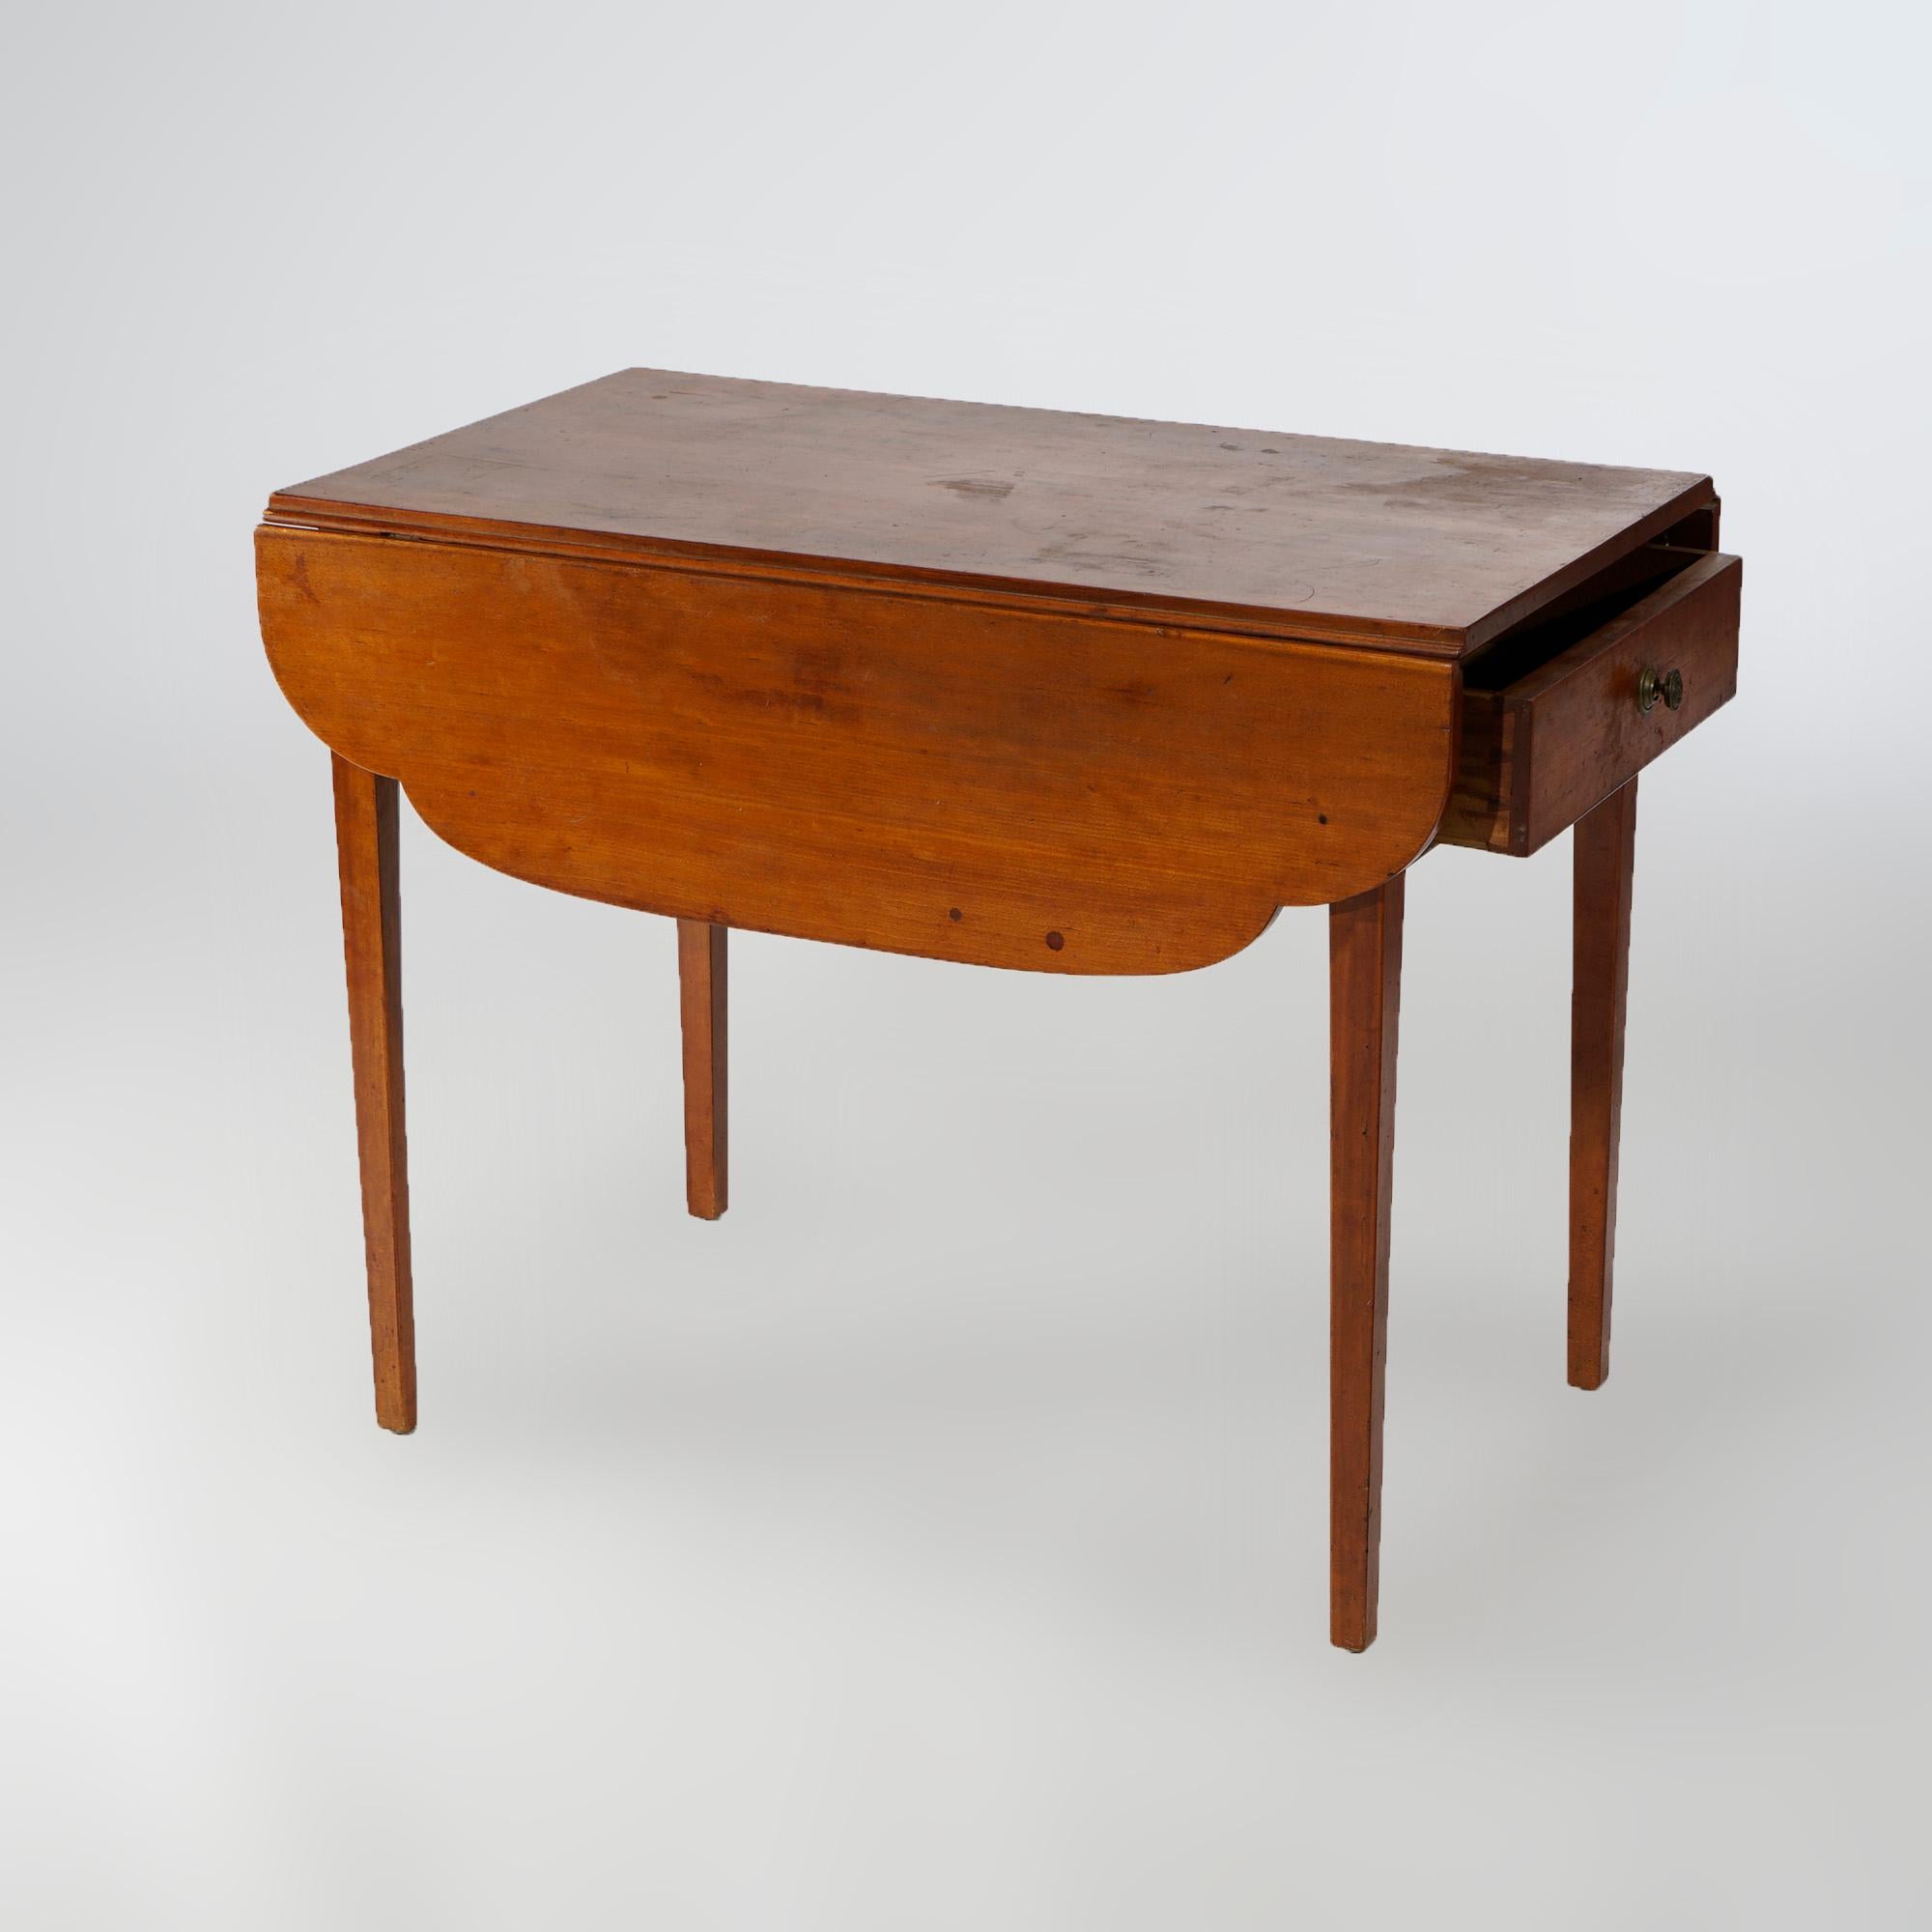 An antique Pembroke table offers cherry construction with shaped drop-leaf top over single drawer, raised on square and tapered legs, c1820

Measures- 28.5''H x 35.5''W x 21.5''D folded; 28.5''H x 35.5''W x 39.25''D open

Catalogue Note: Ask about